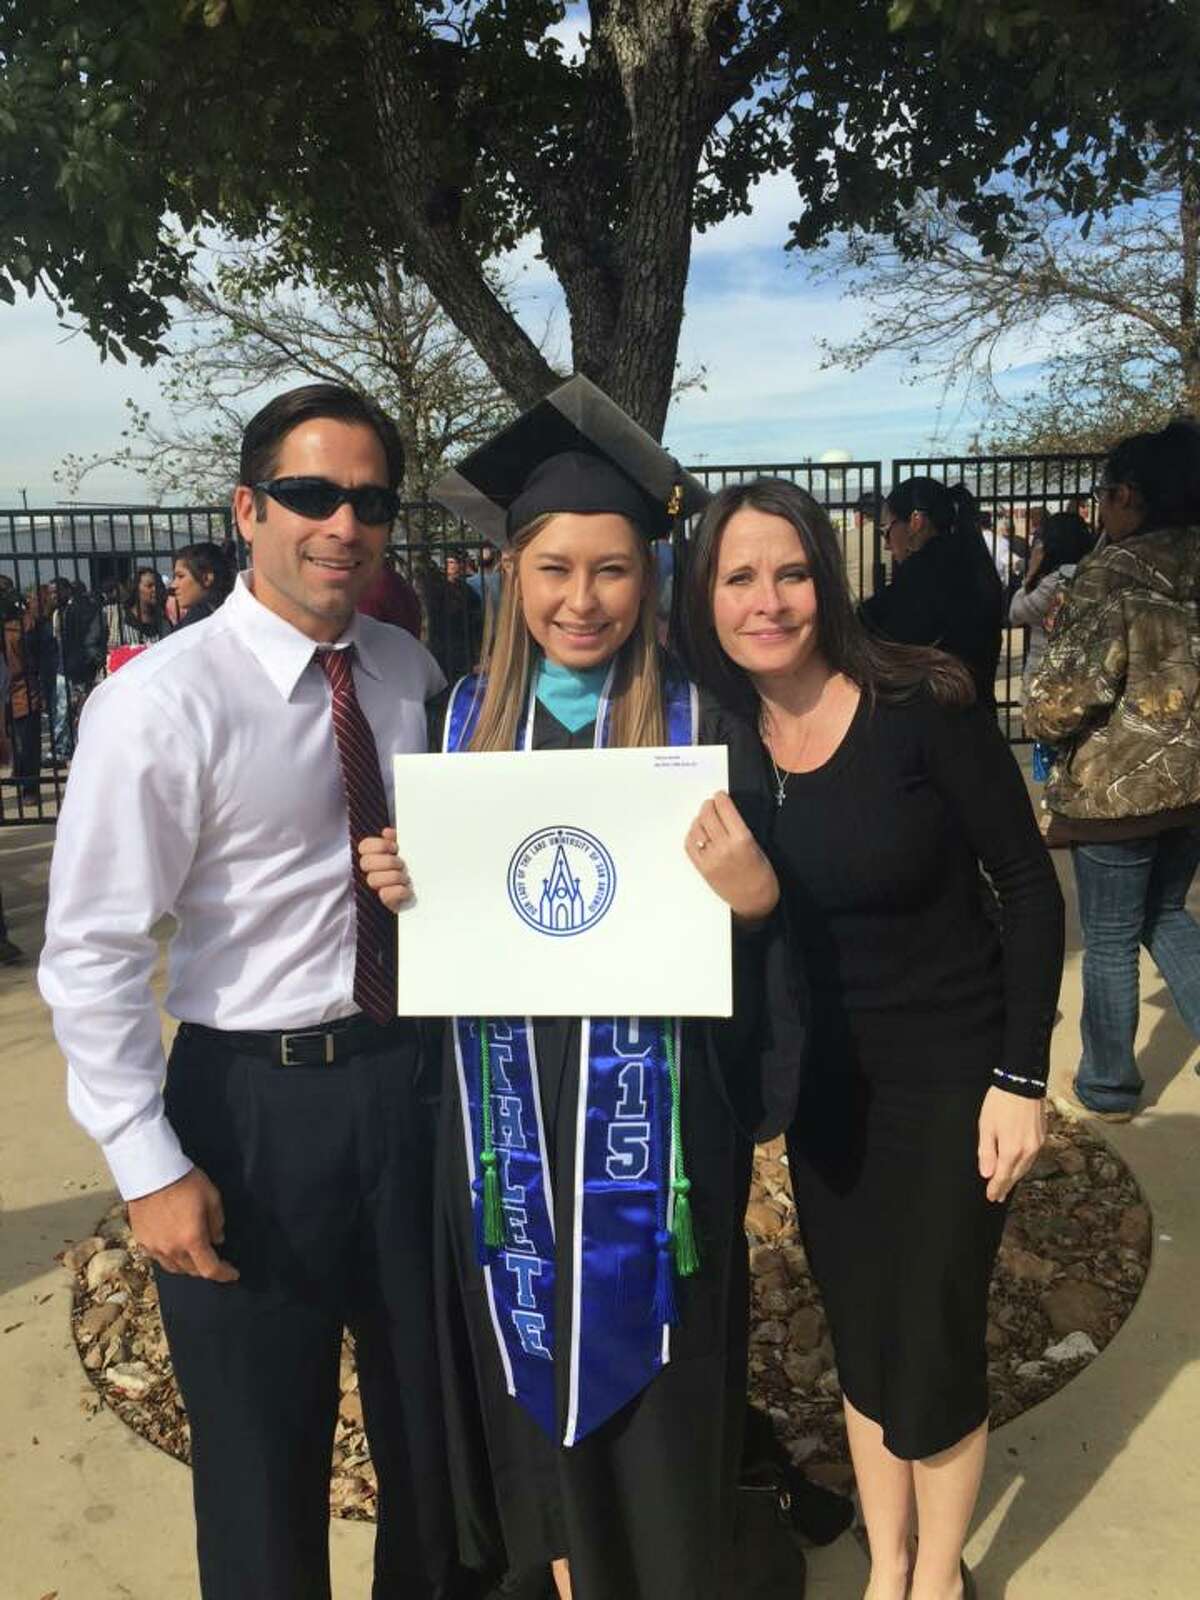 Hailey Reyes poses for a photo with her parents after graduating from Our Lady of the Lake University with a bachelor's degree in psychology.